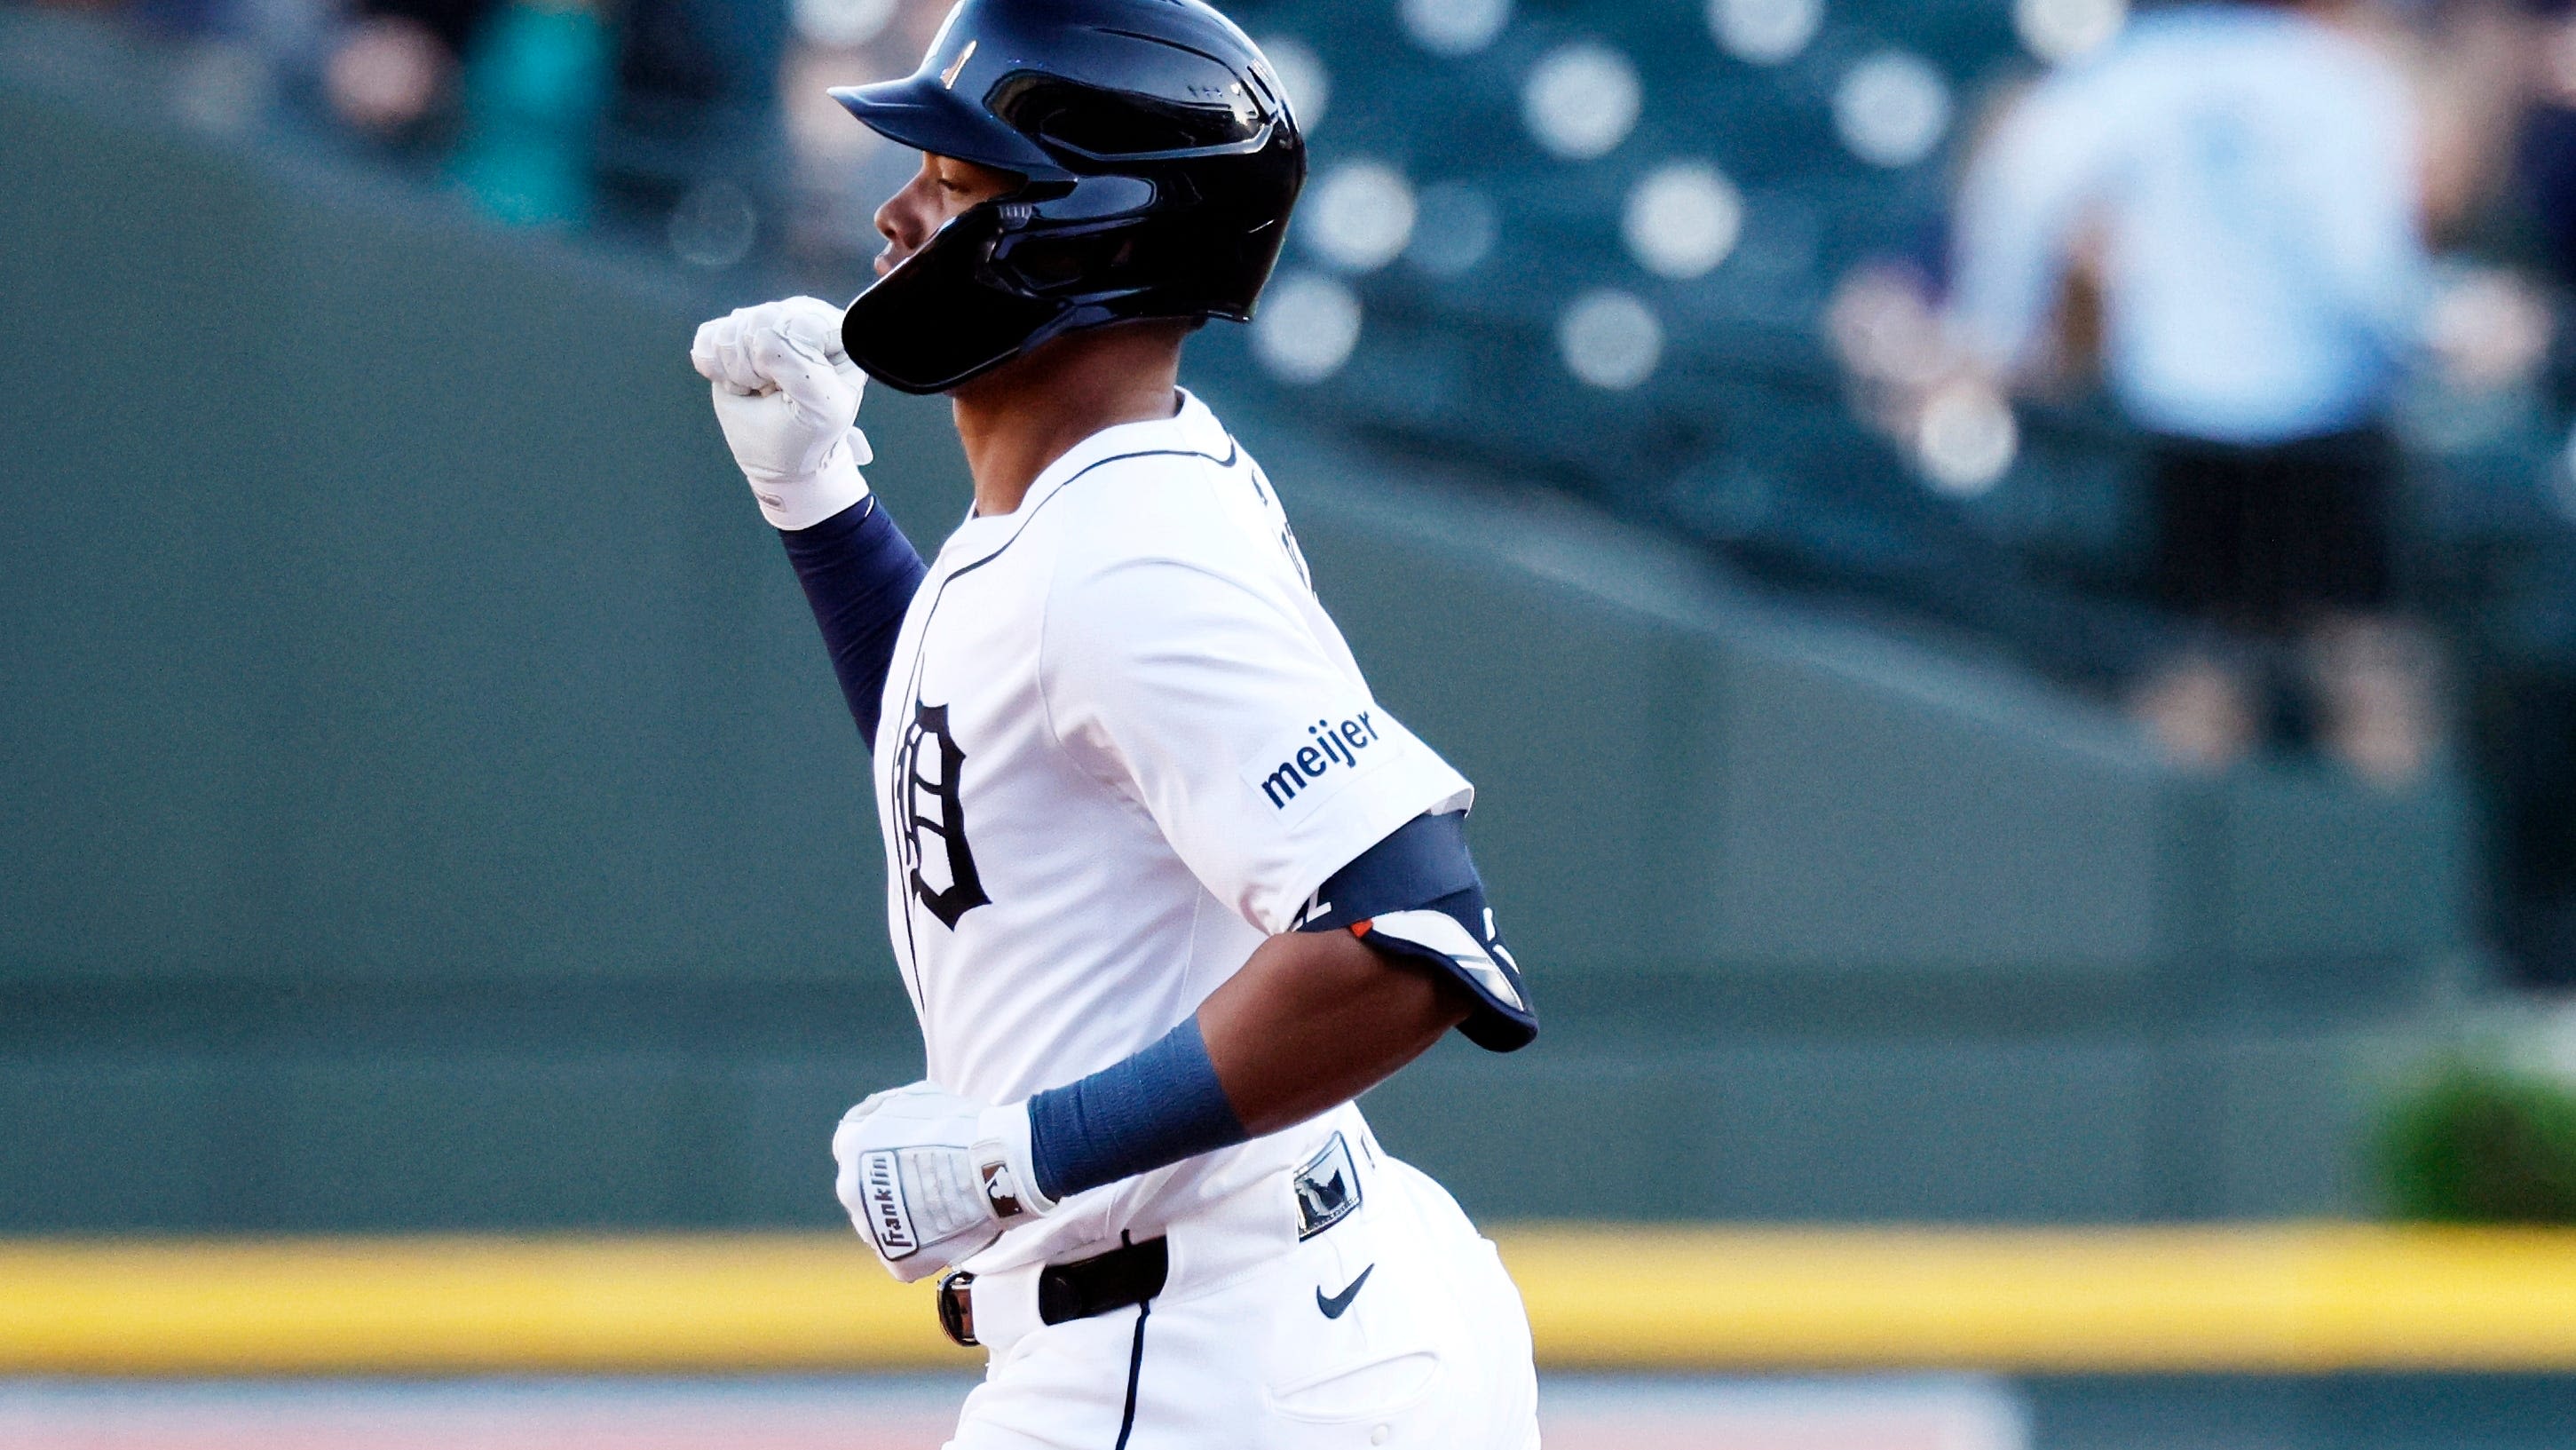 Wenceel Pérez slugs Detroit Tigers to 11-6 win over St. Louis Cardinals with two home runs